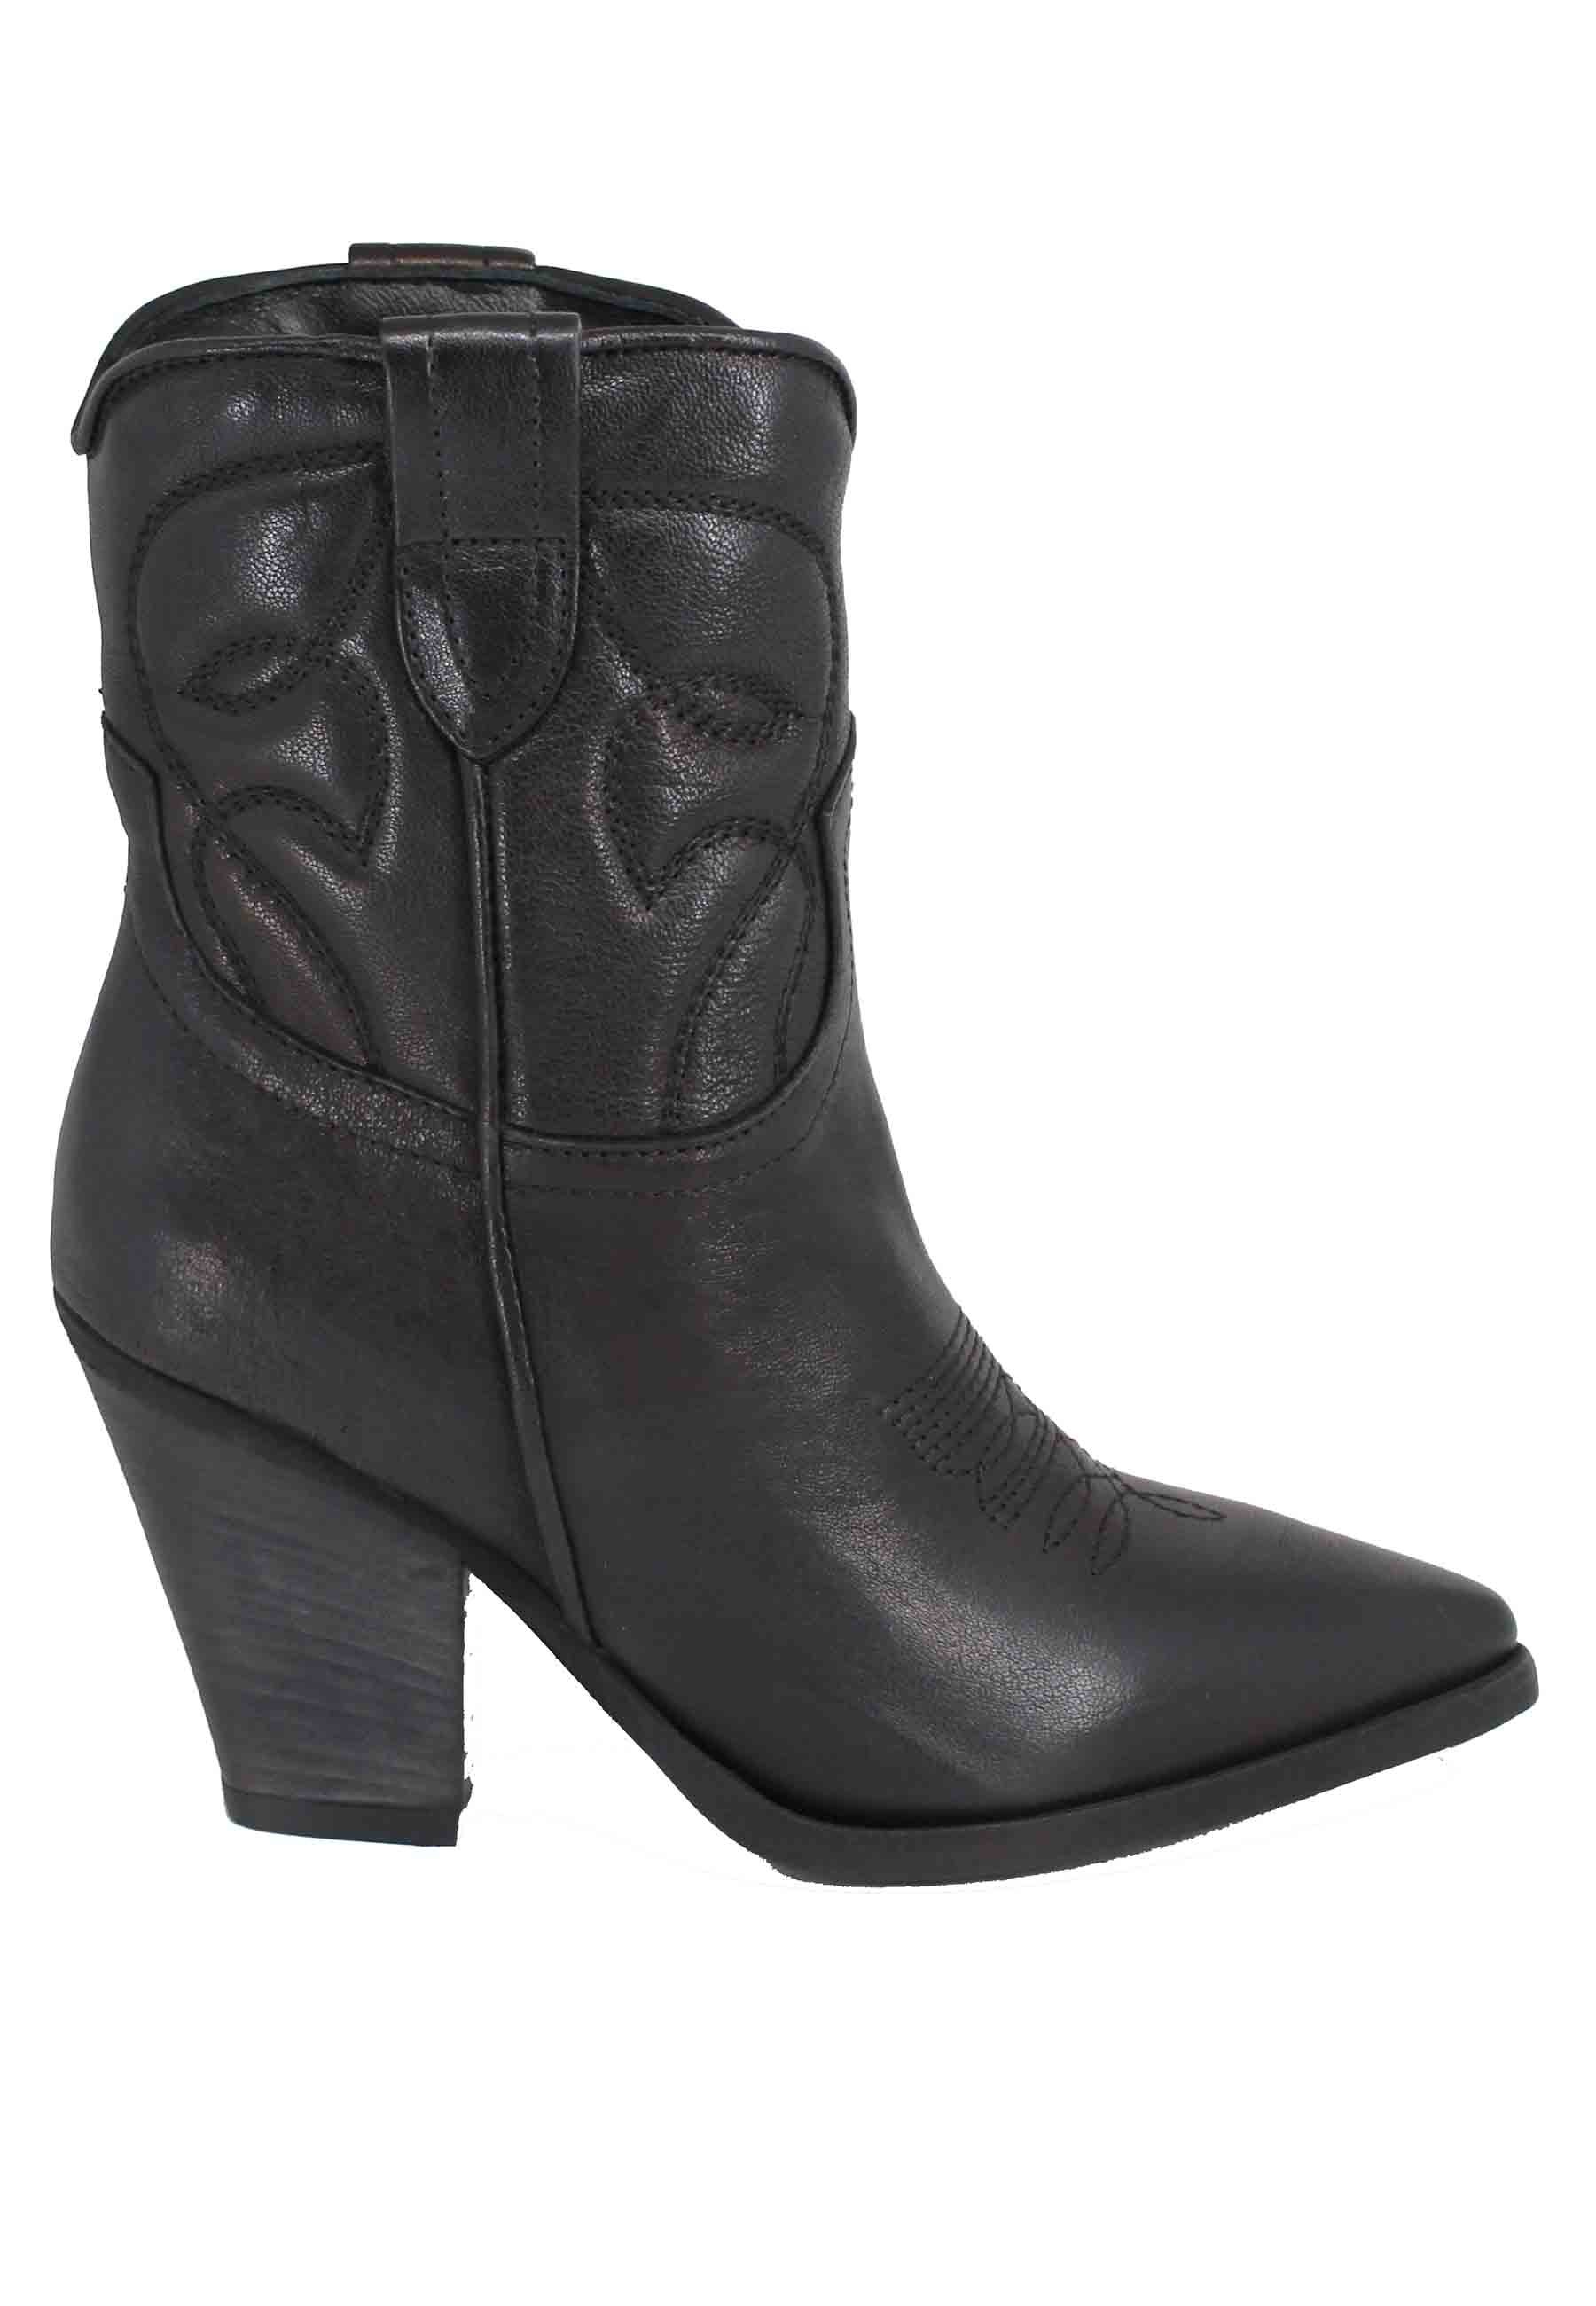 Women's Texan boots in black leather with high heel